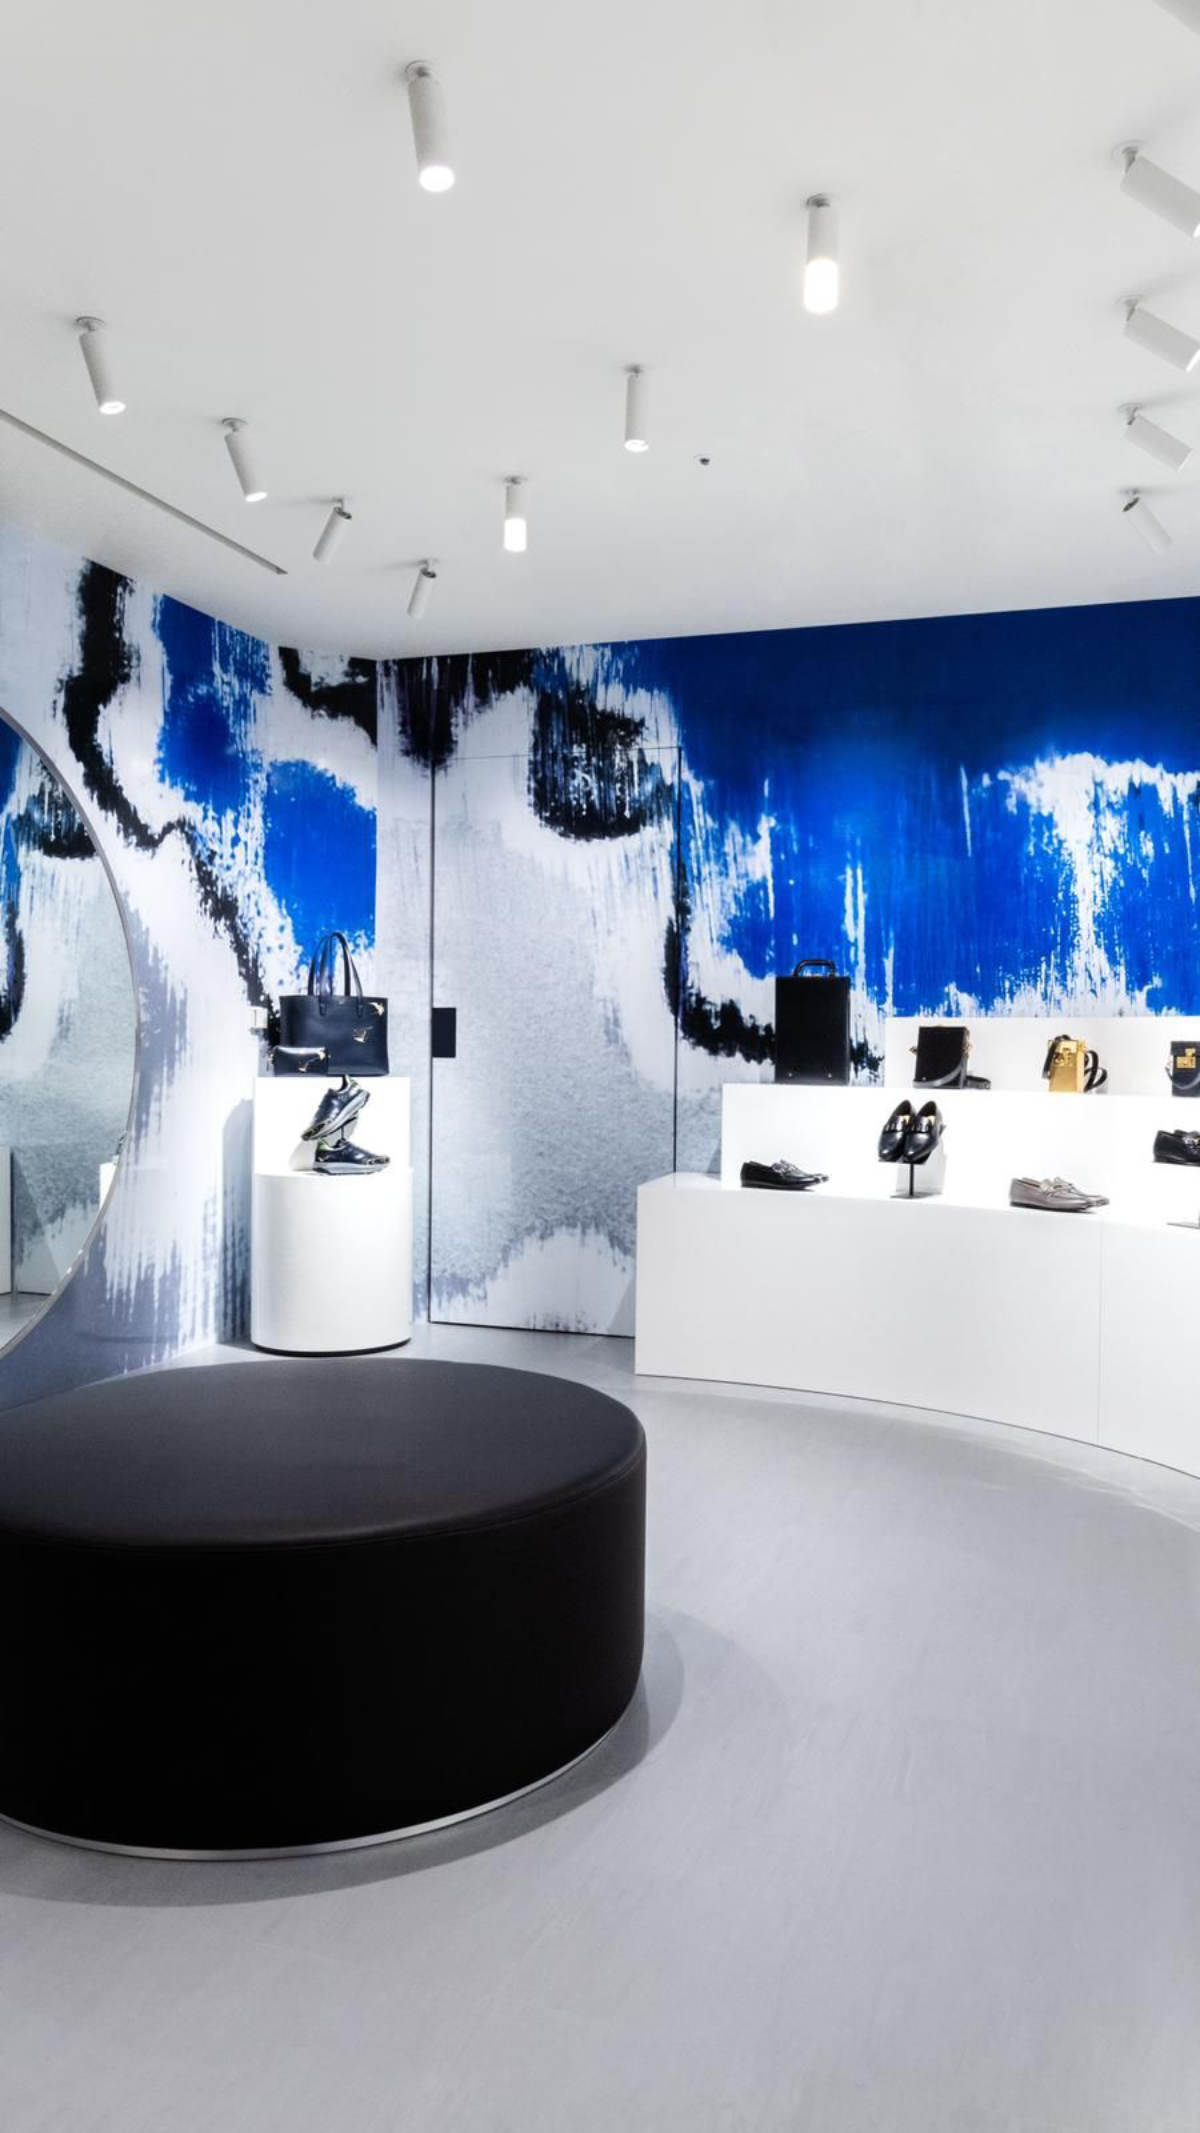 New Dunhill Pop-up Concept Store In The Prestigious Ginza Six Shopping Destination In Tokyo, Japan